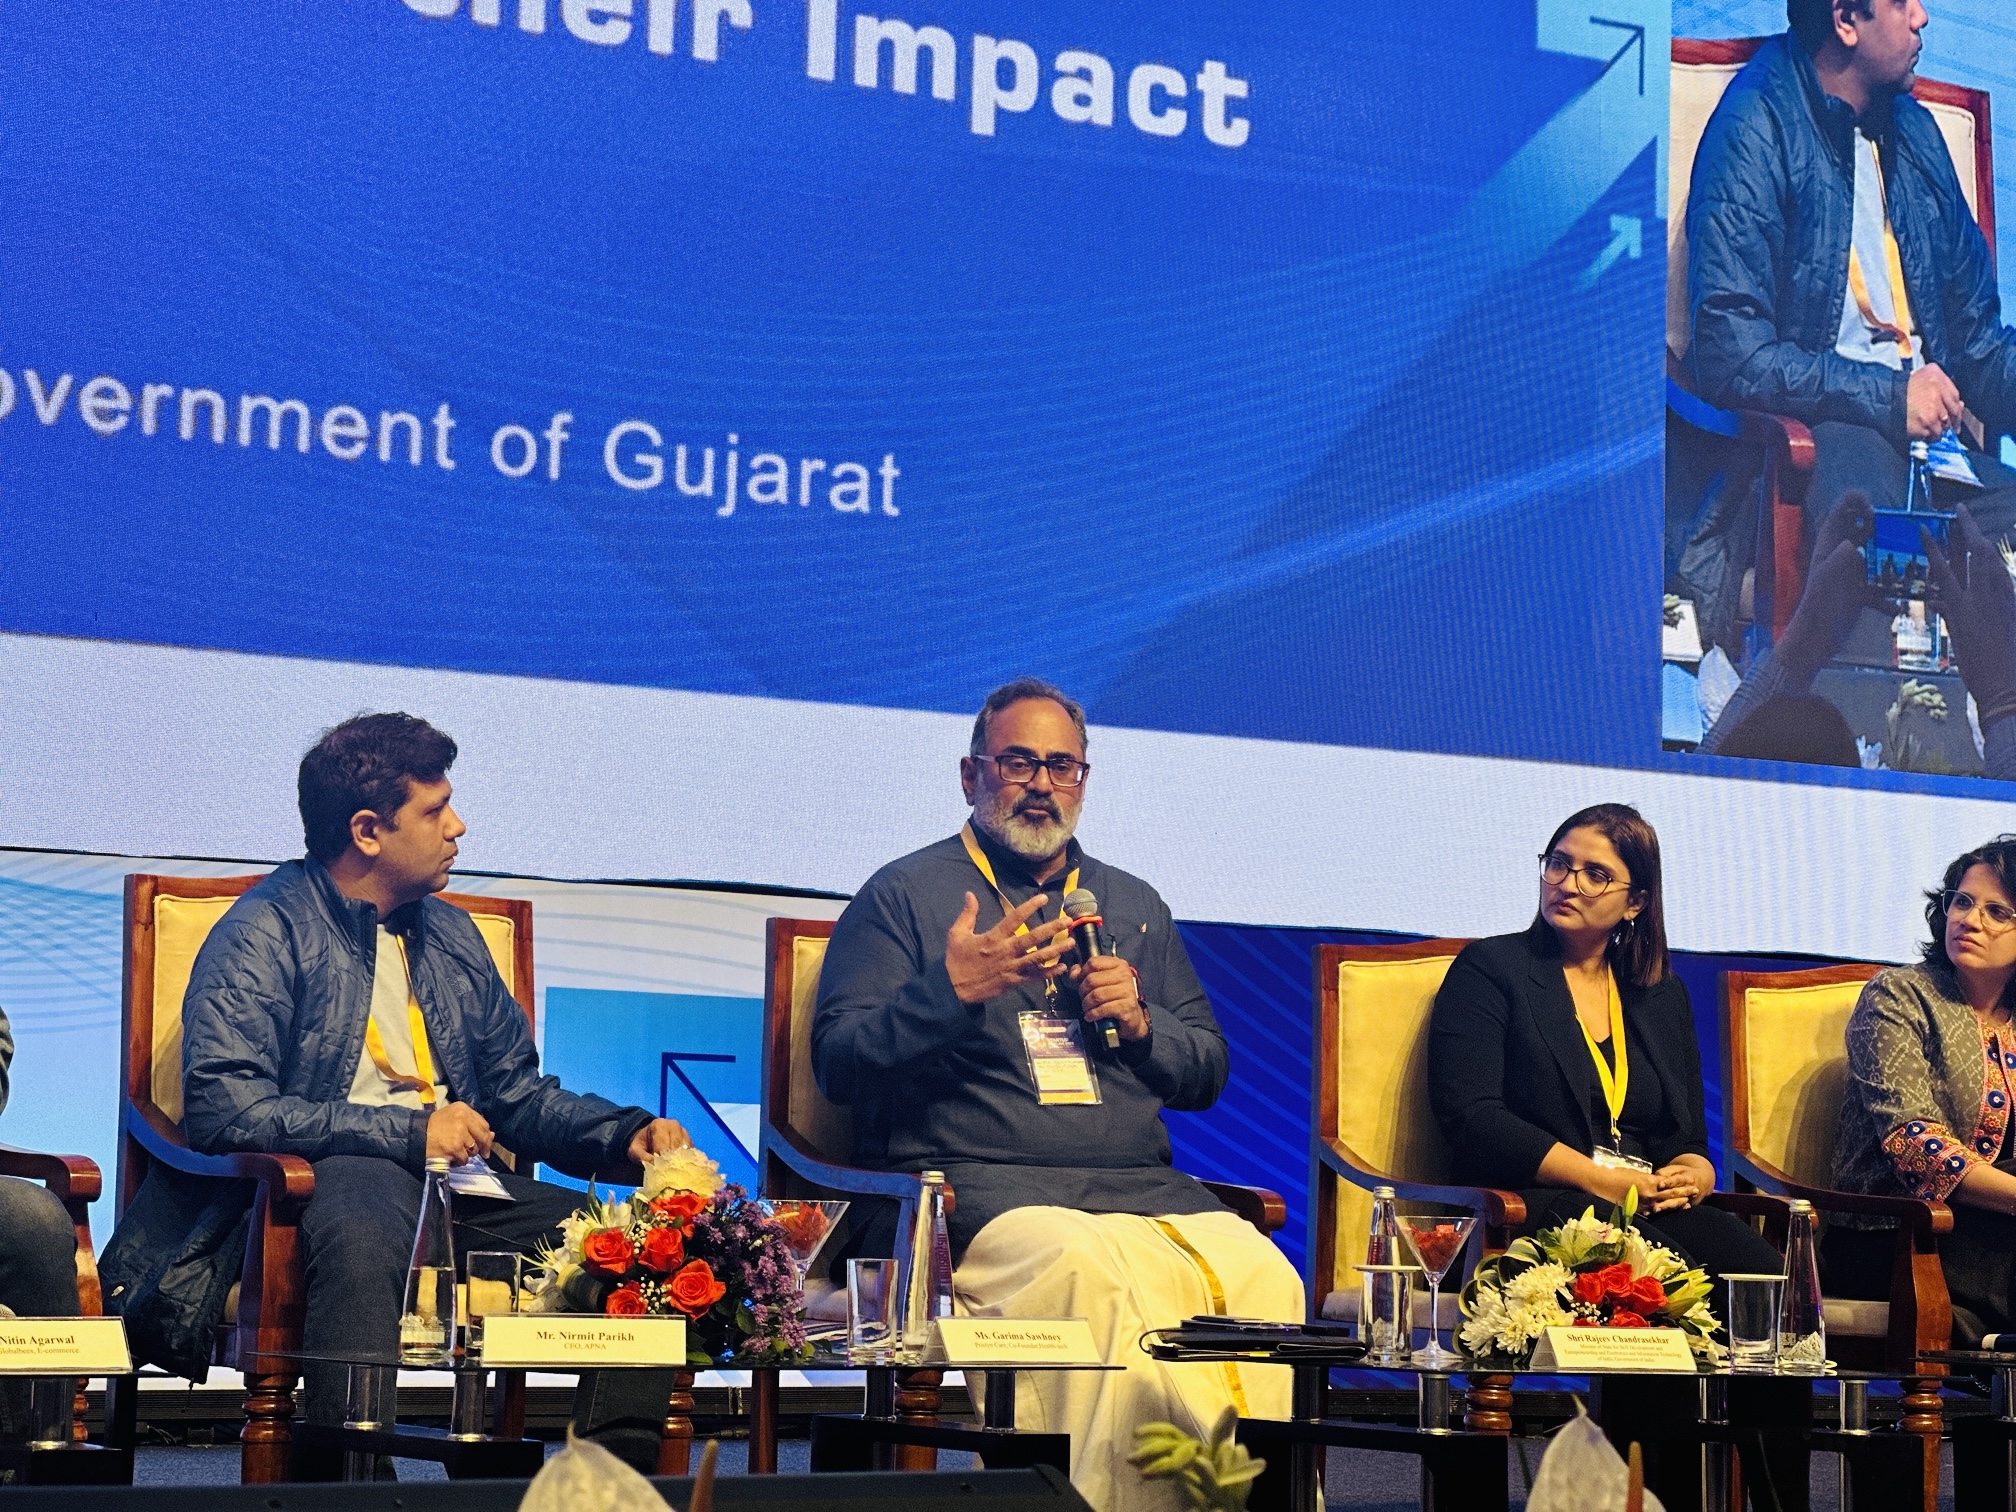 India will have 10,000 unicorns in the coming years: MoS Rajeev Chandrasekhar in Gujarat